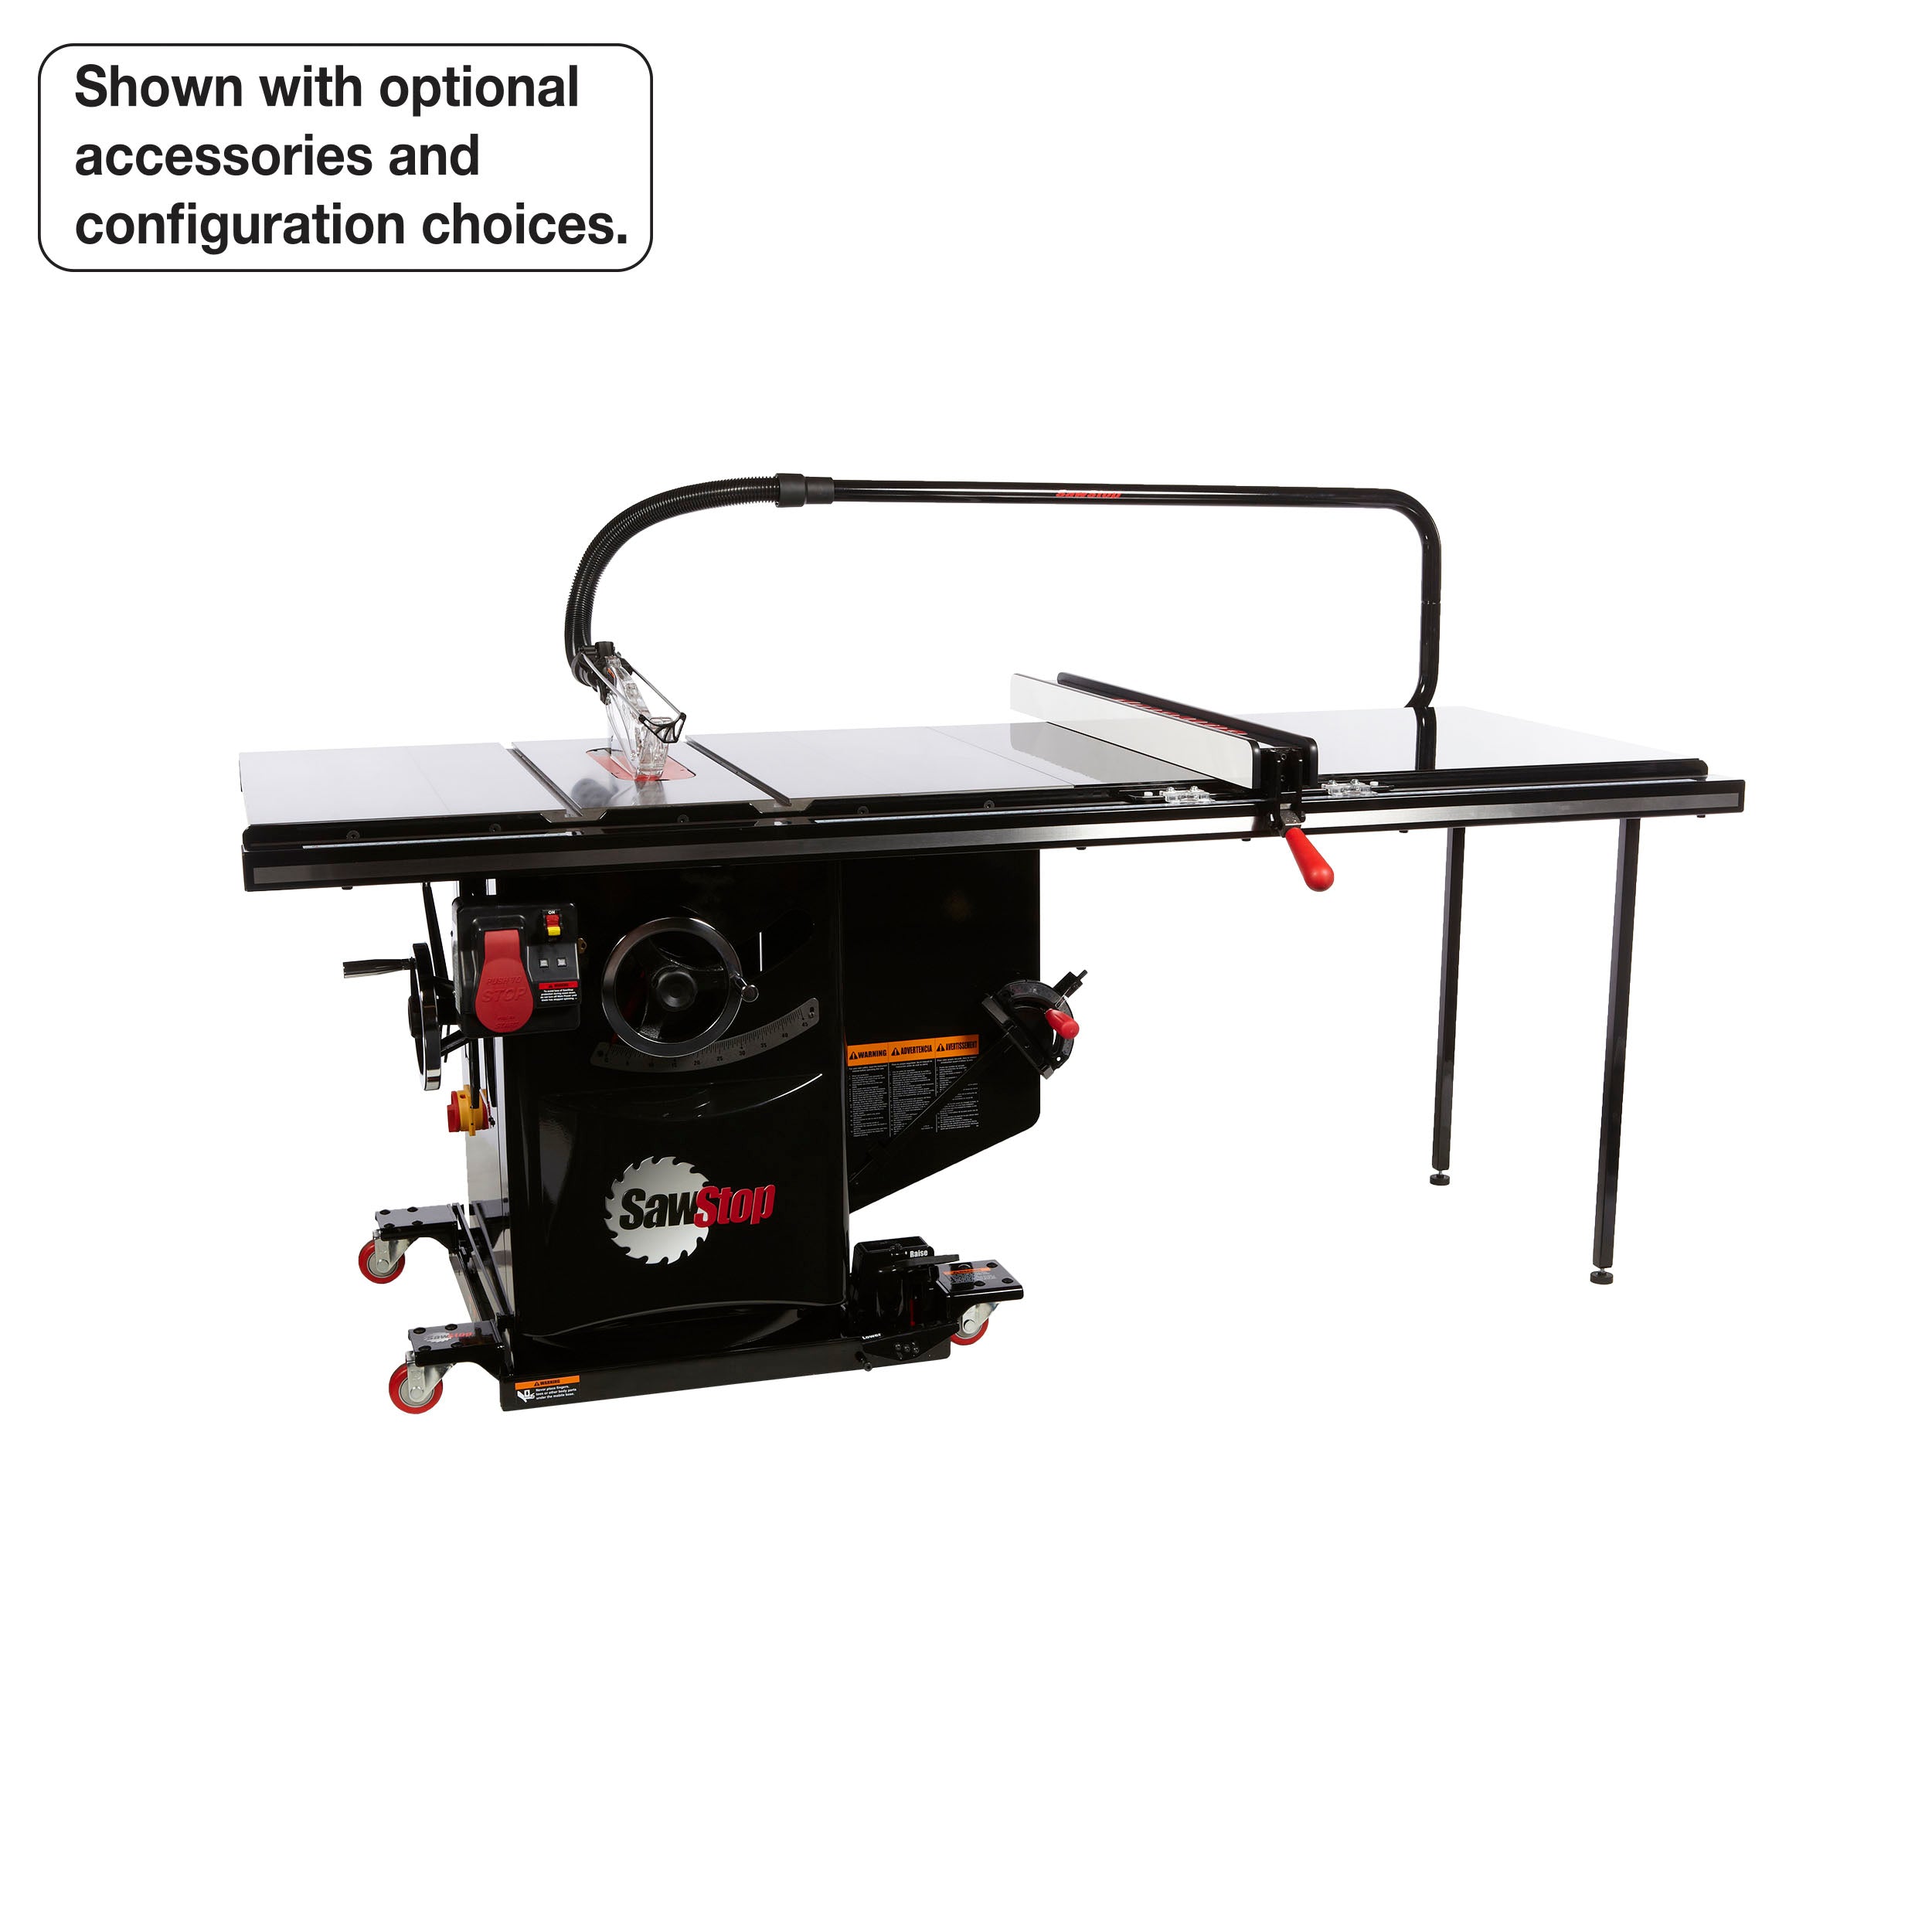 SawStop 5HP, 1ph, 230v Industrial Cabinet Saw w/ 36